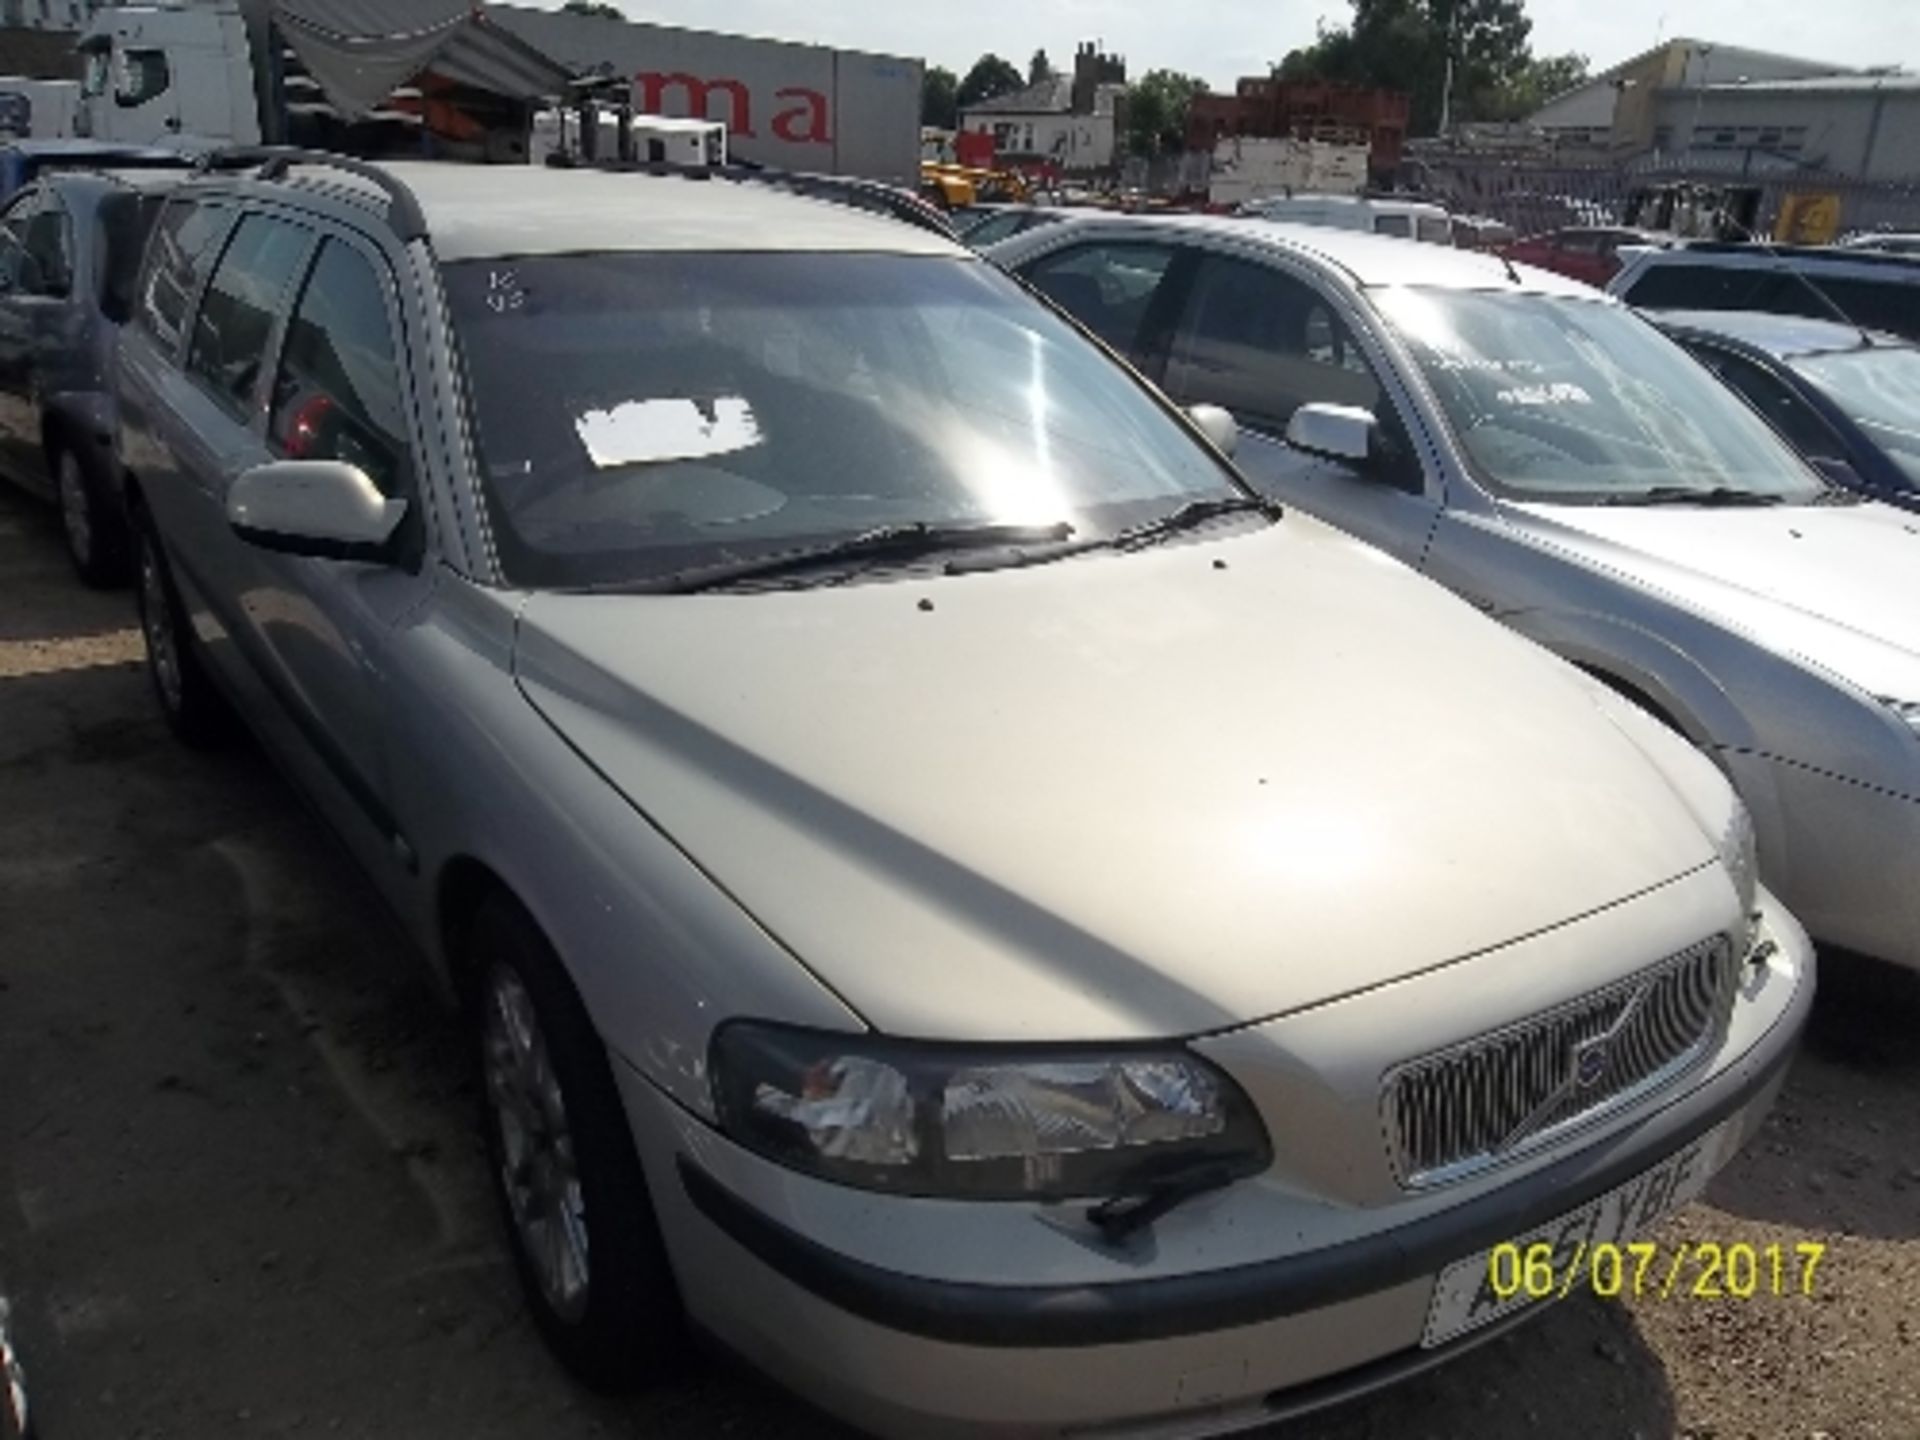 Volvo V70 T5 Estate - AP51 YBF Date of registration: 21.12.2001 2319cc, petrol, 4 speed auto, silver - Image 2 of 4